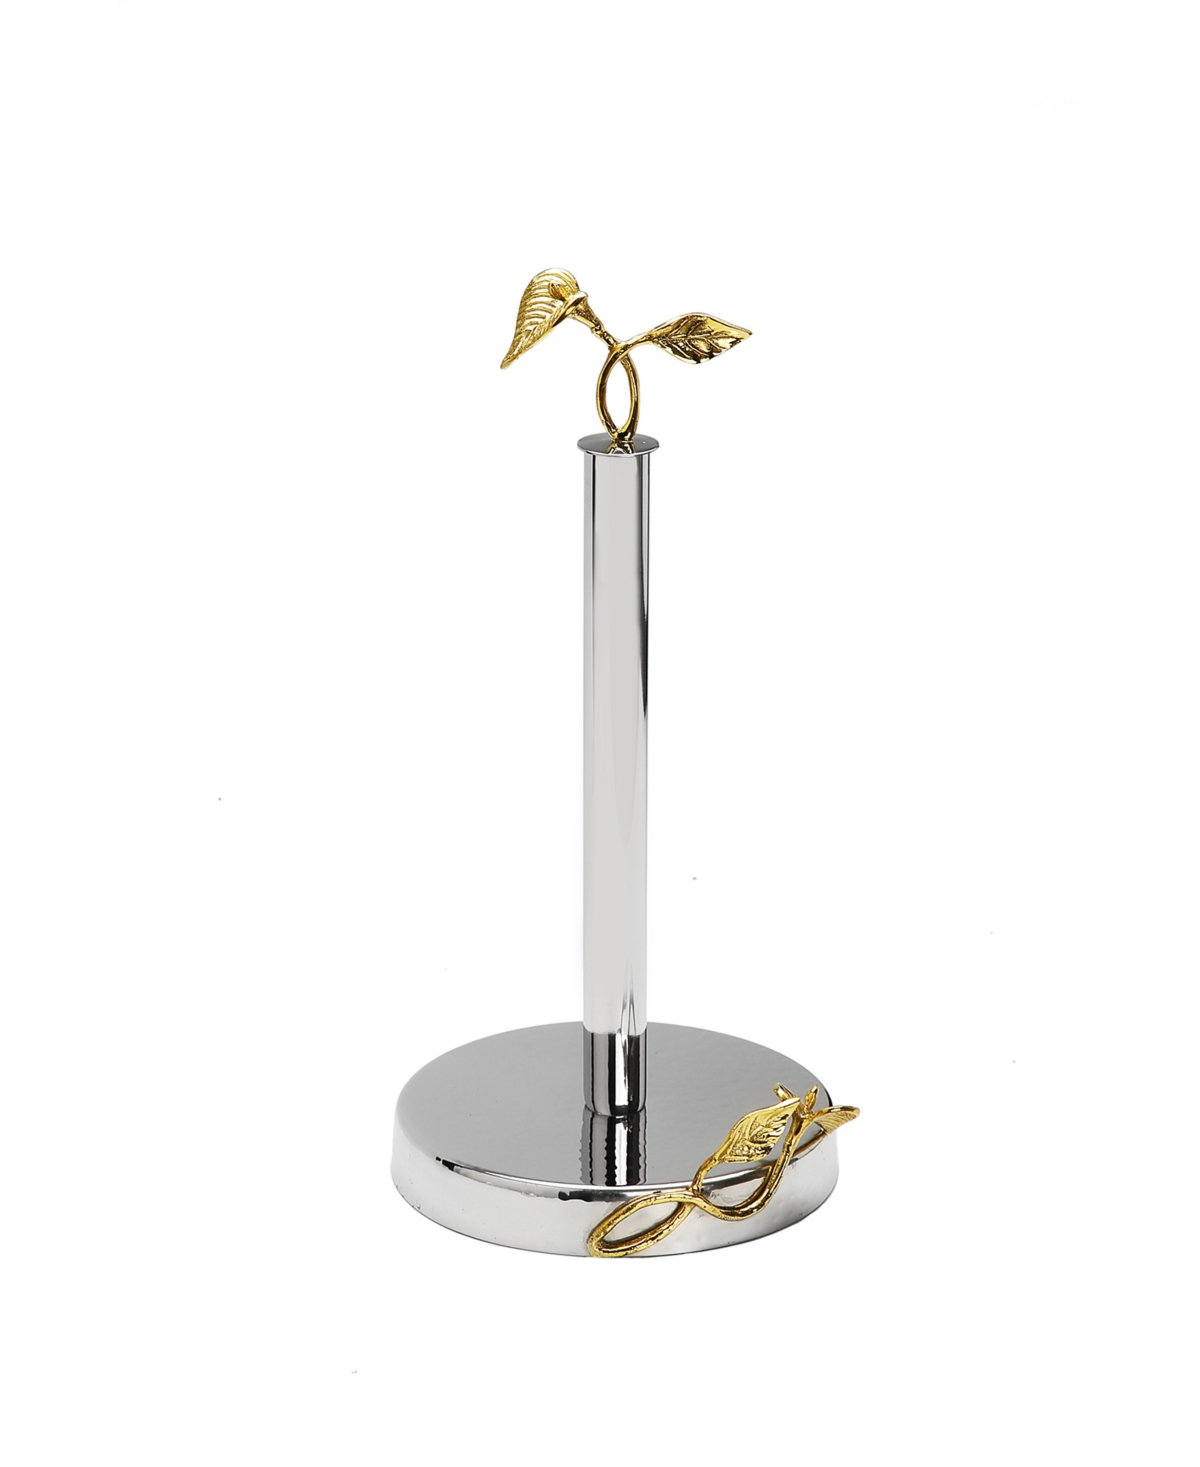 Classic Touch Paper Towel Holder With Leaf Design In Gold - Tone